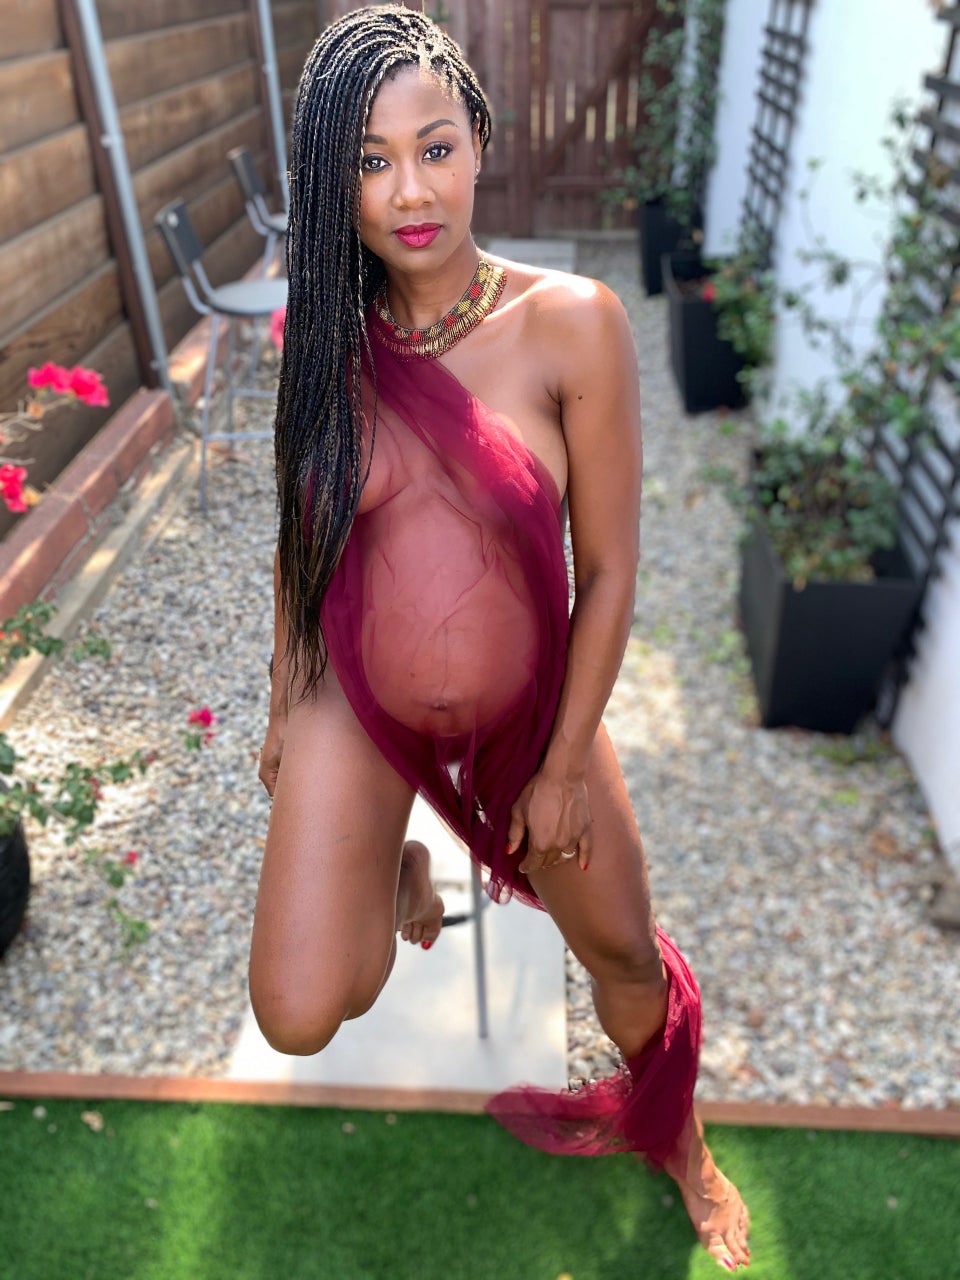 Actress Emayatzy Corinealdi Is Pregnant and Glowing: “It’s Such a Spiritual Experience”